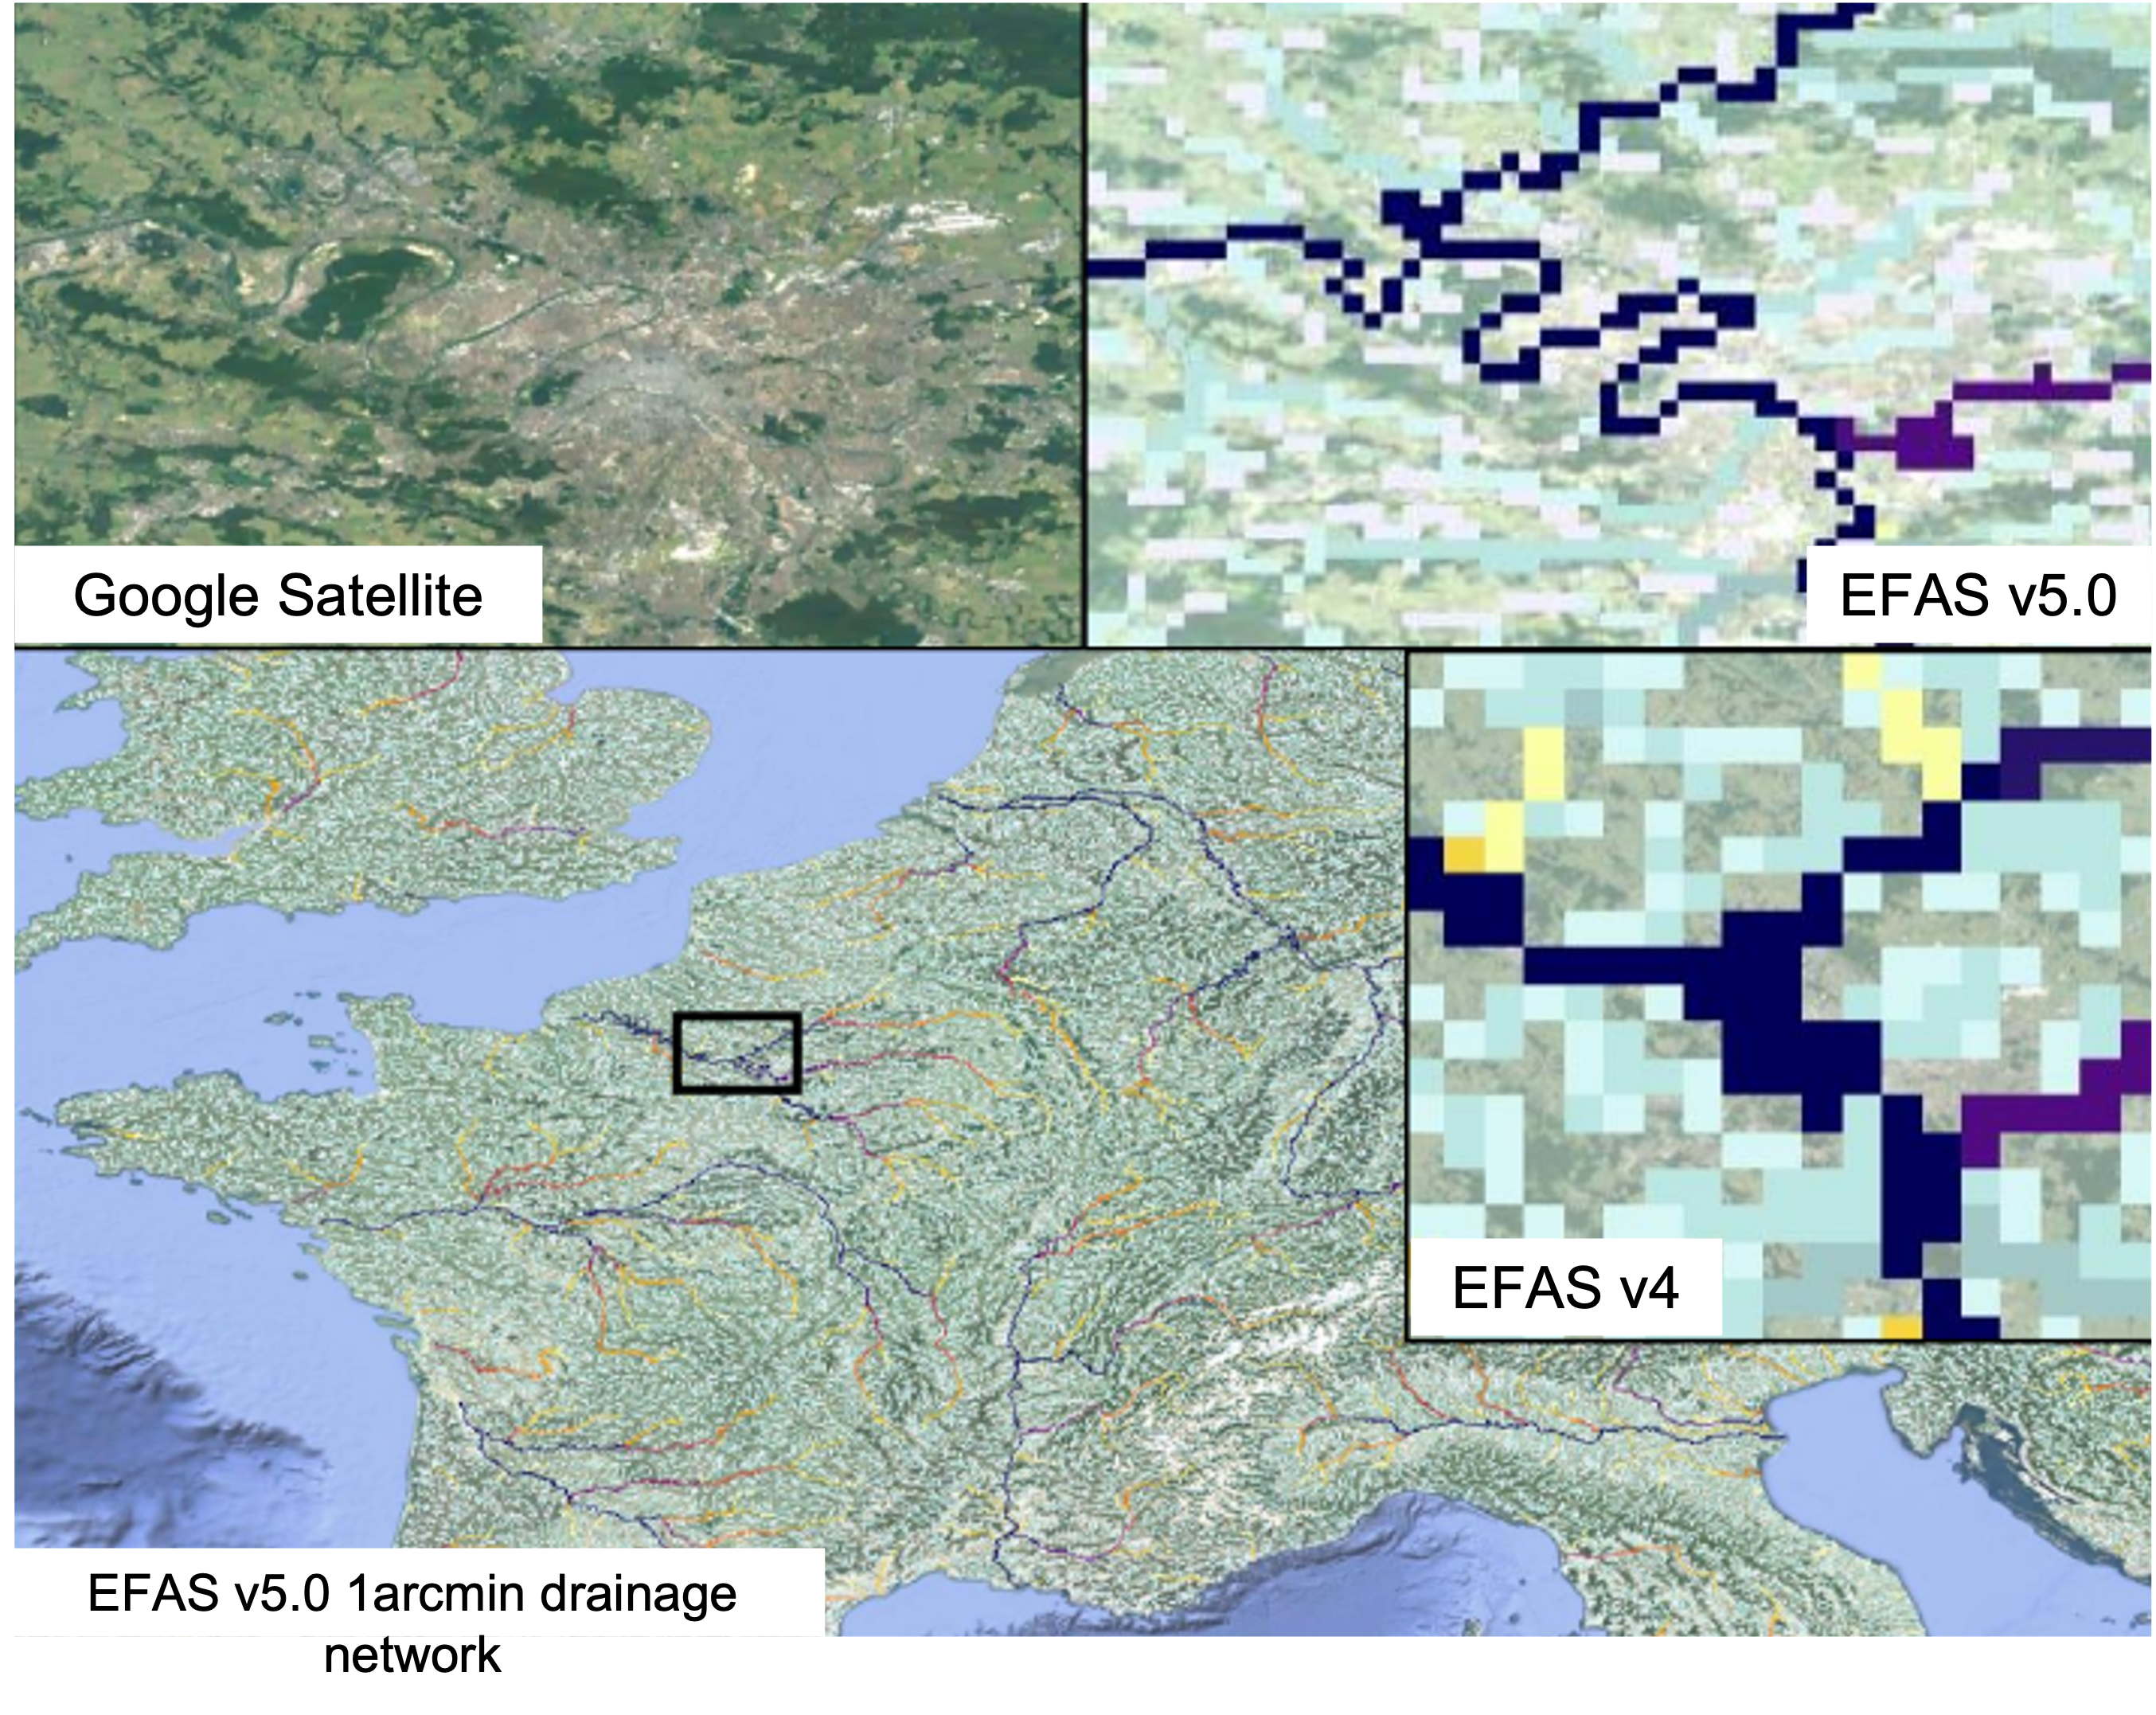 One of the many changes with the release of EFASv5.0 is the increased spatial resolution from 5-km to 1 arcmin /0.0167 degrees resolution (~1.4km)